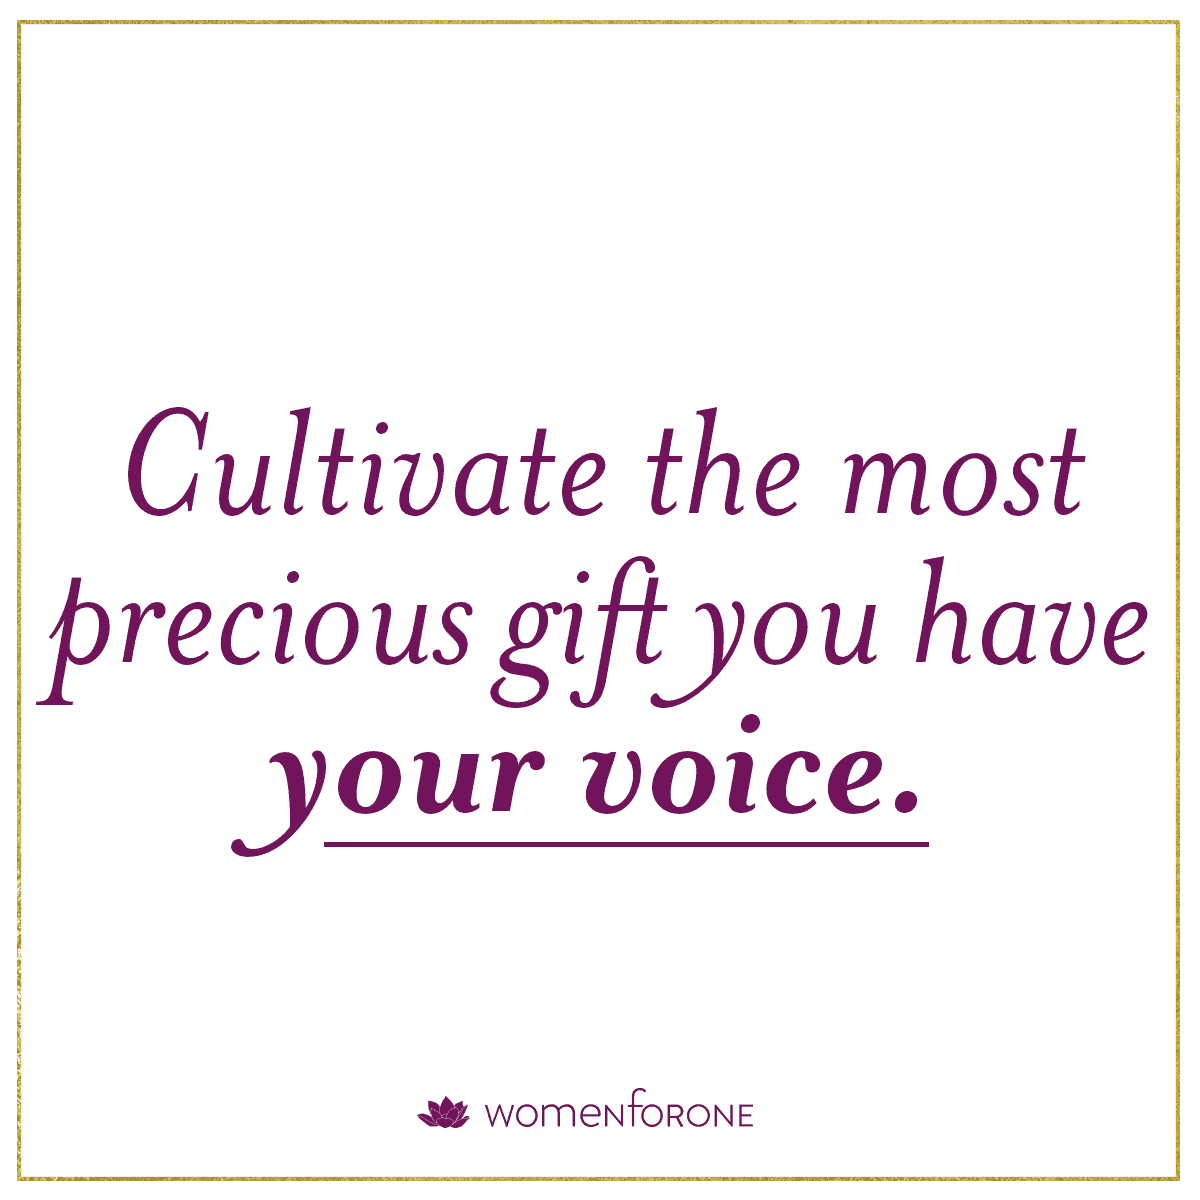 Cultivate the most precious gift you have: your voice.